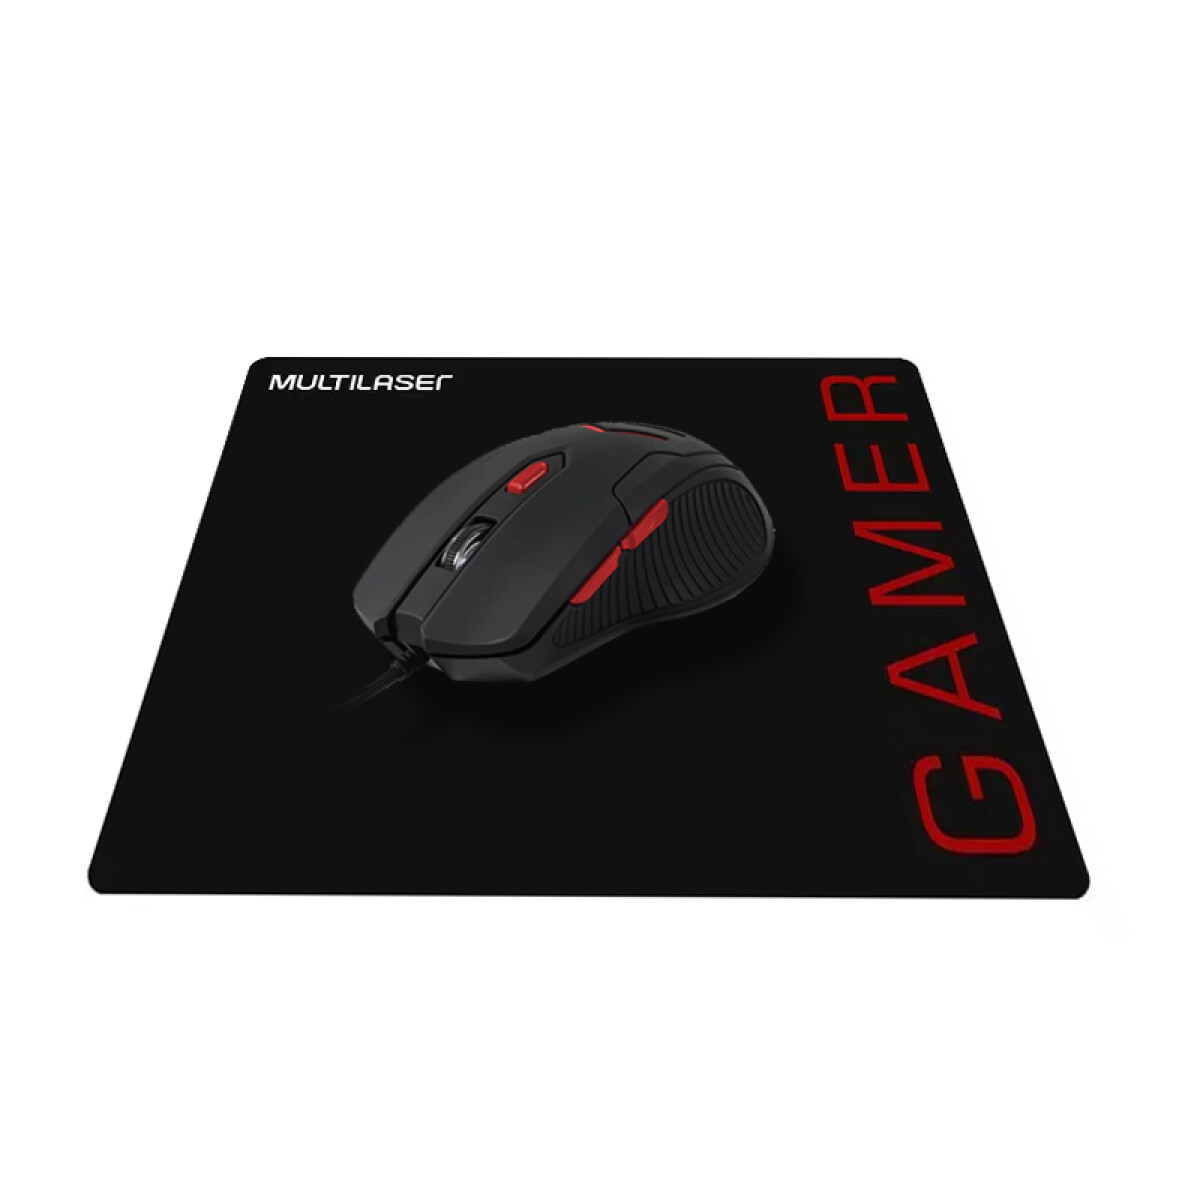 Combo Gamer Multilaser: Mouse+Mousepad - Unica 